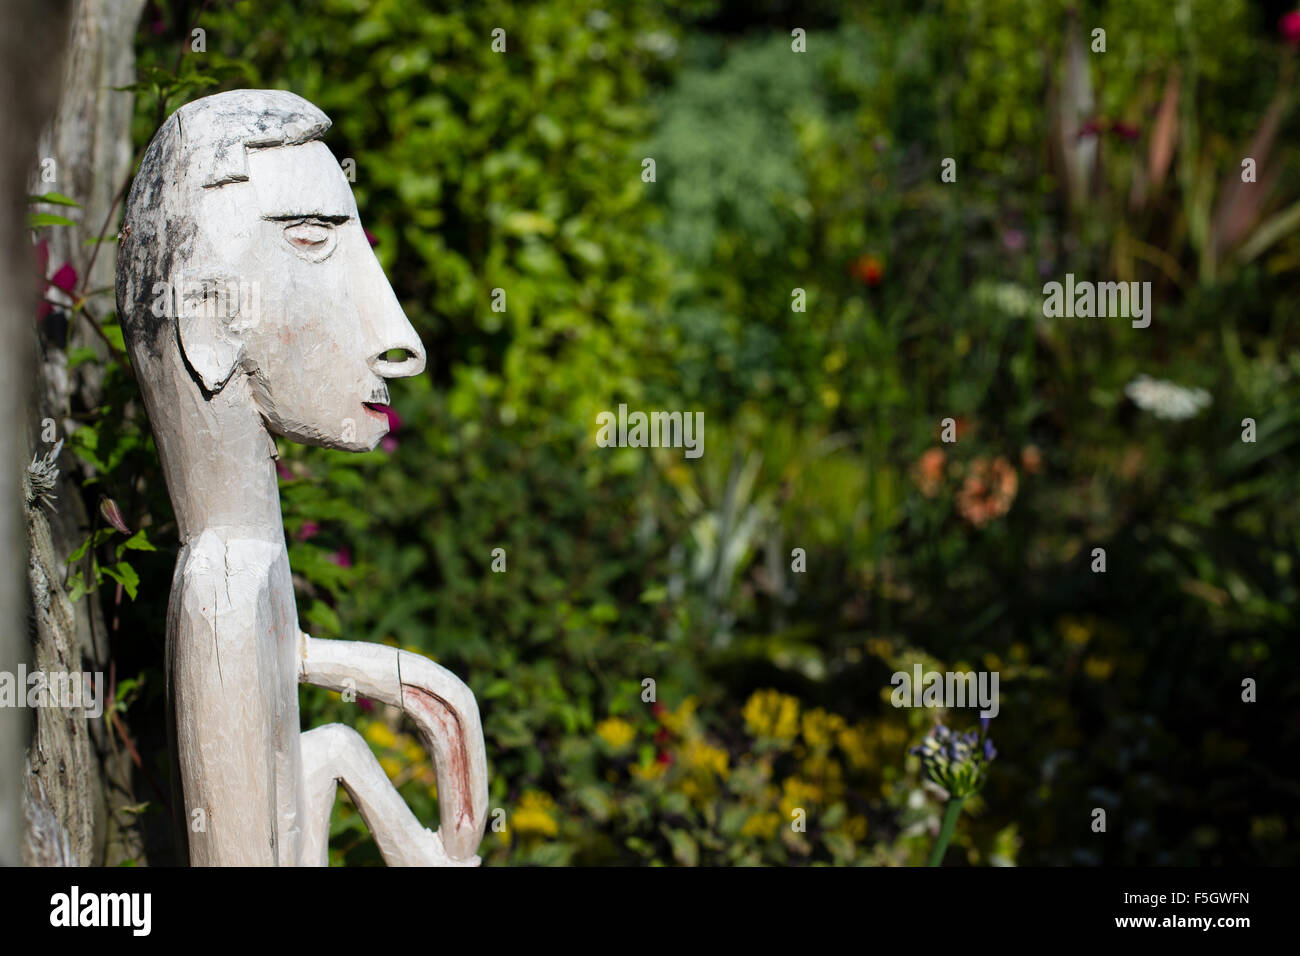 Male wooden figure in cottage garden Stock Photo